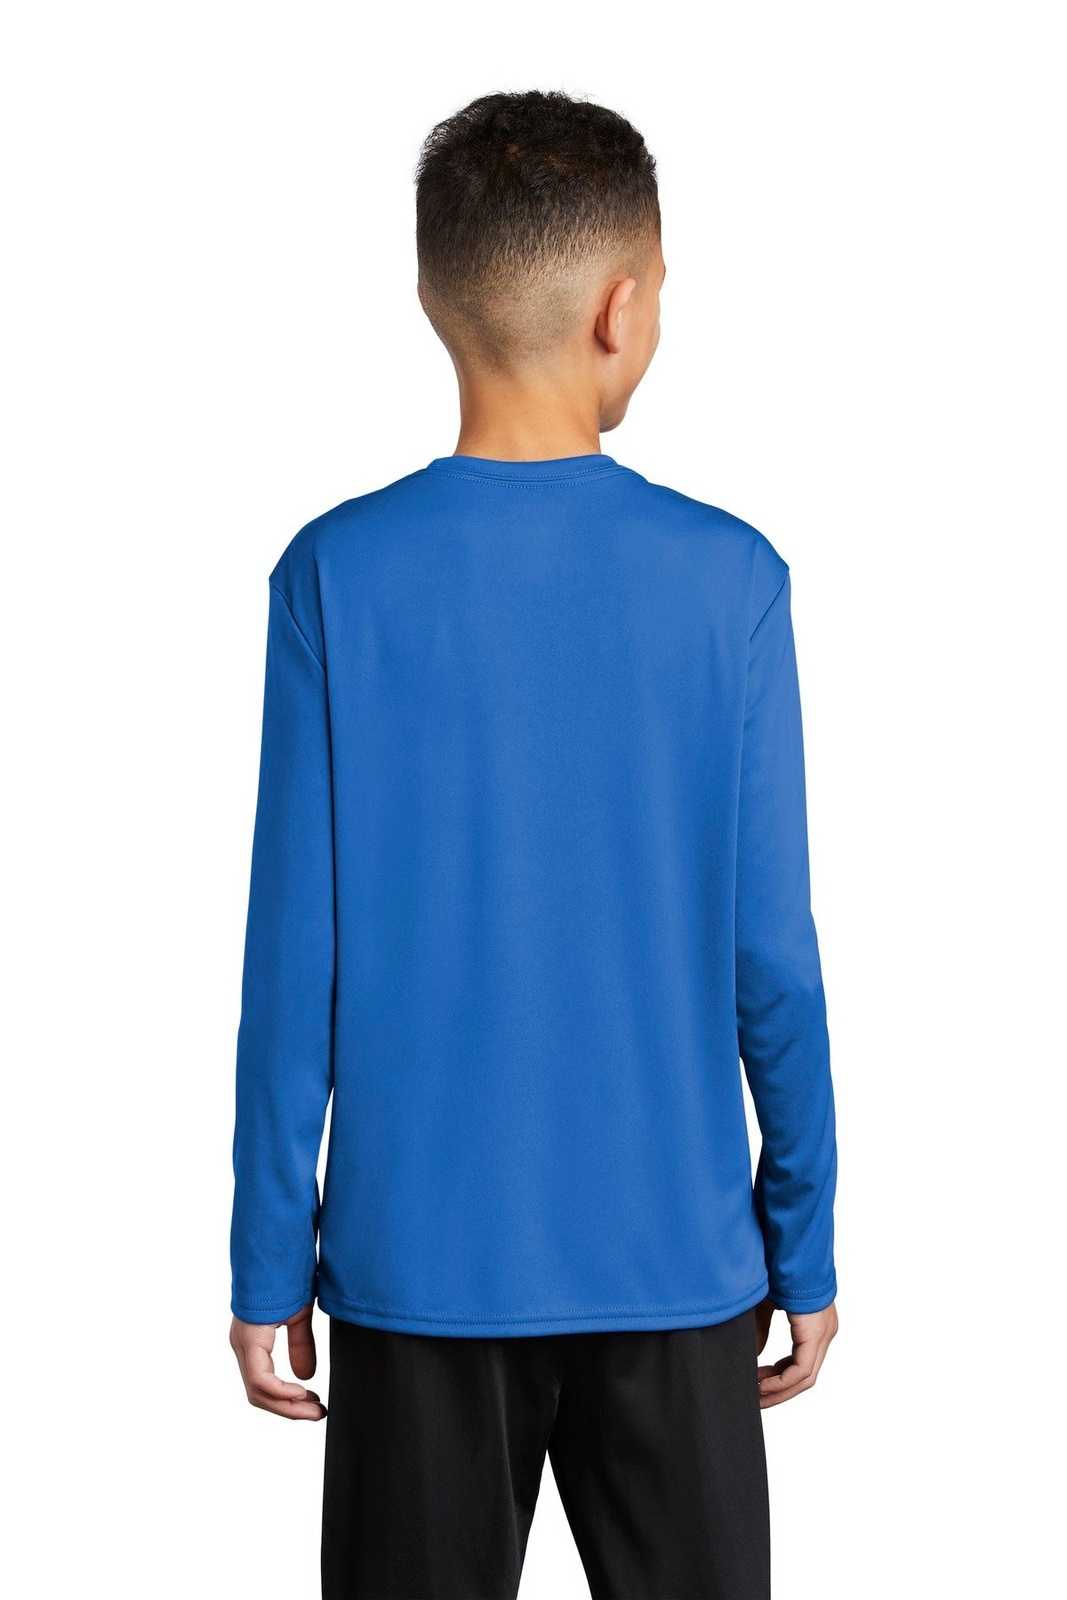 Port & Company PC380YLS Youth Long Sleeve Performance Tee - Royal - HIT a Double - 1